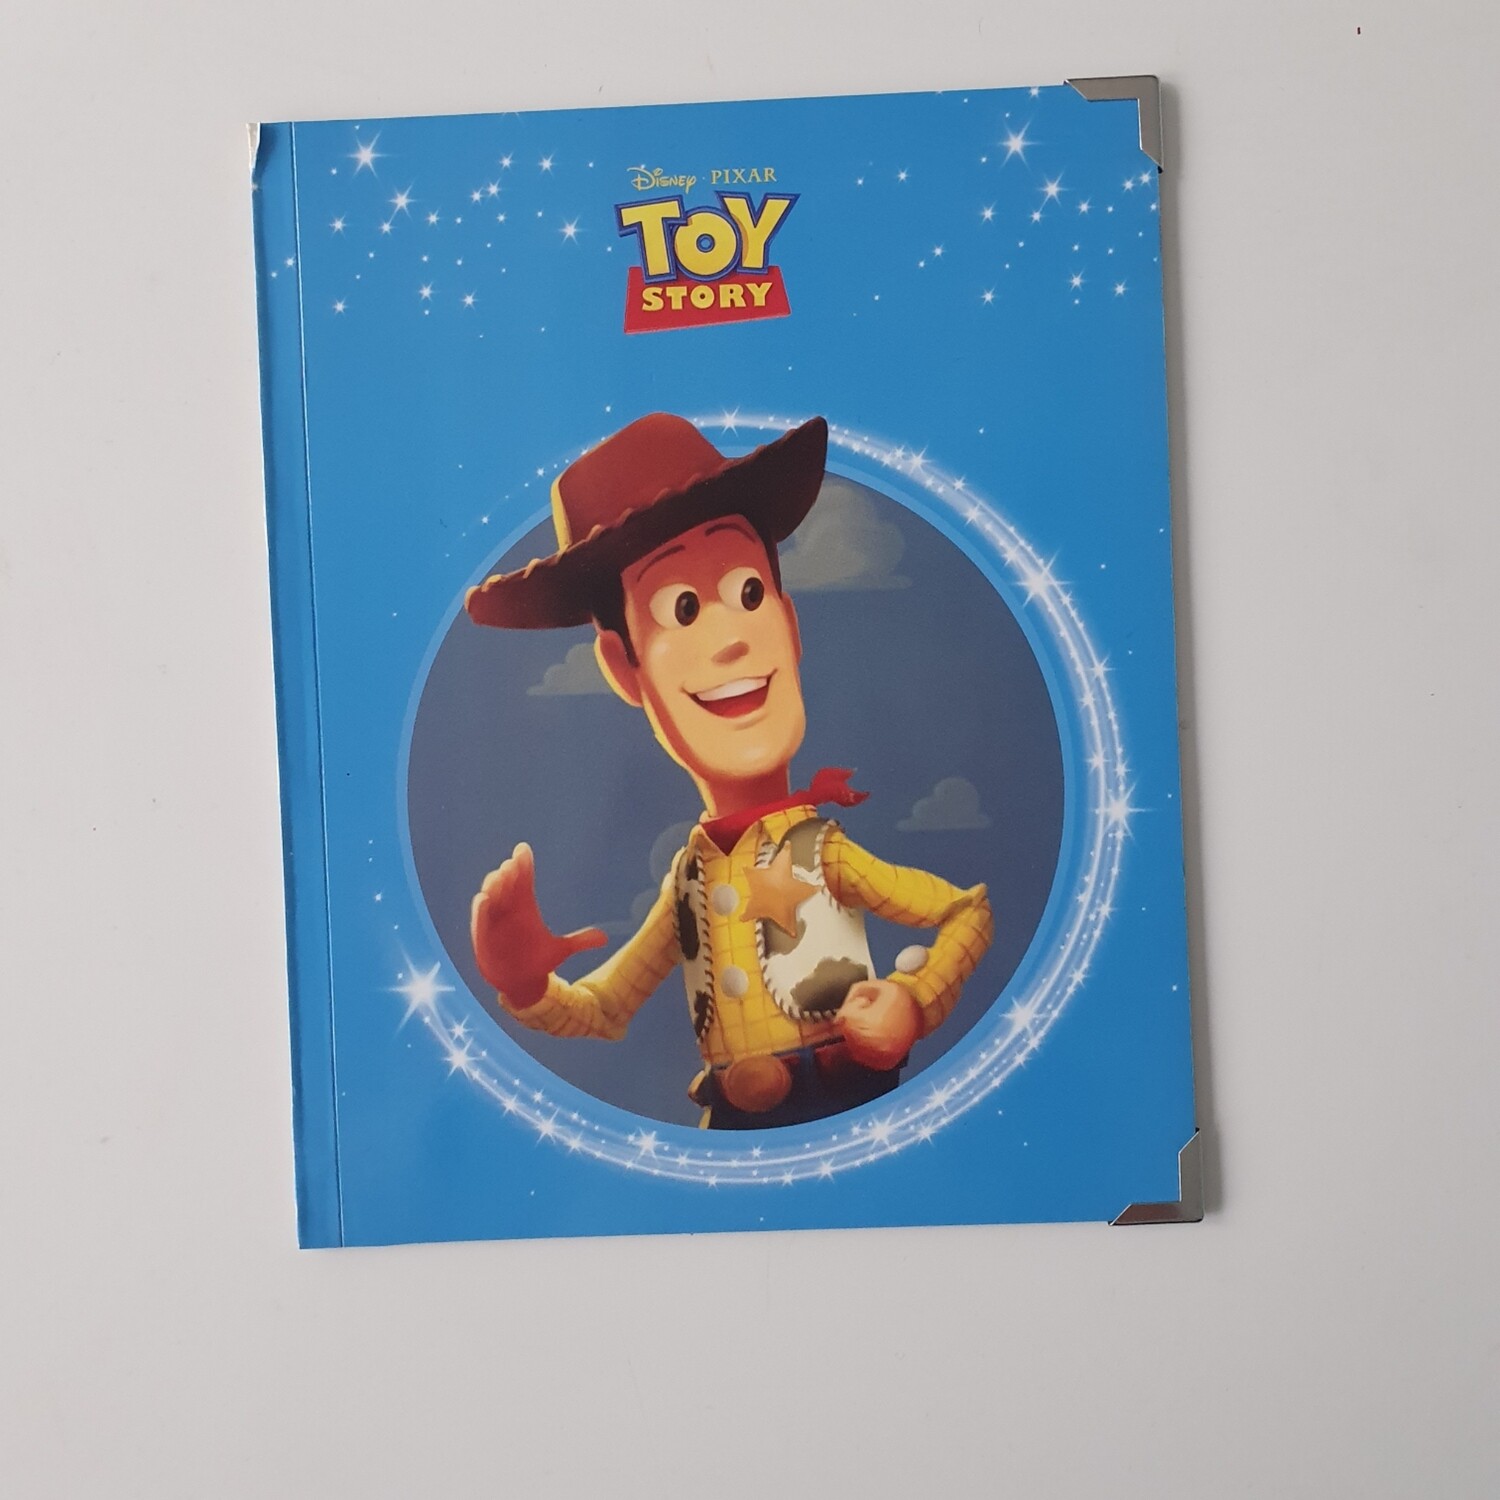 Toy Story - Woody Notebook - board book will come with metal book corners included